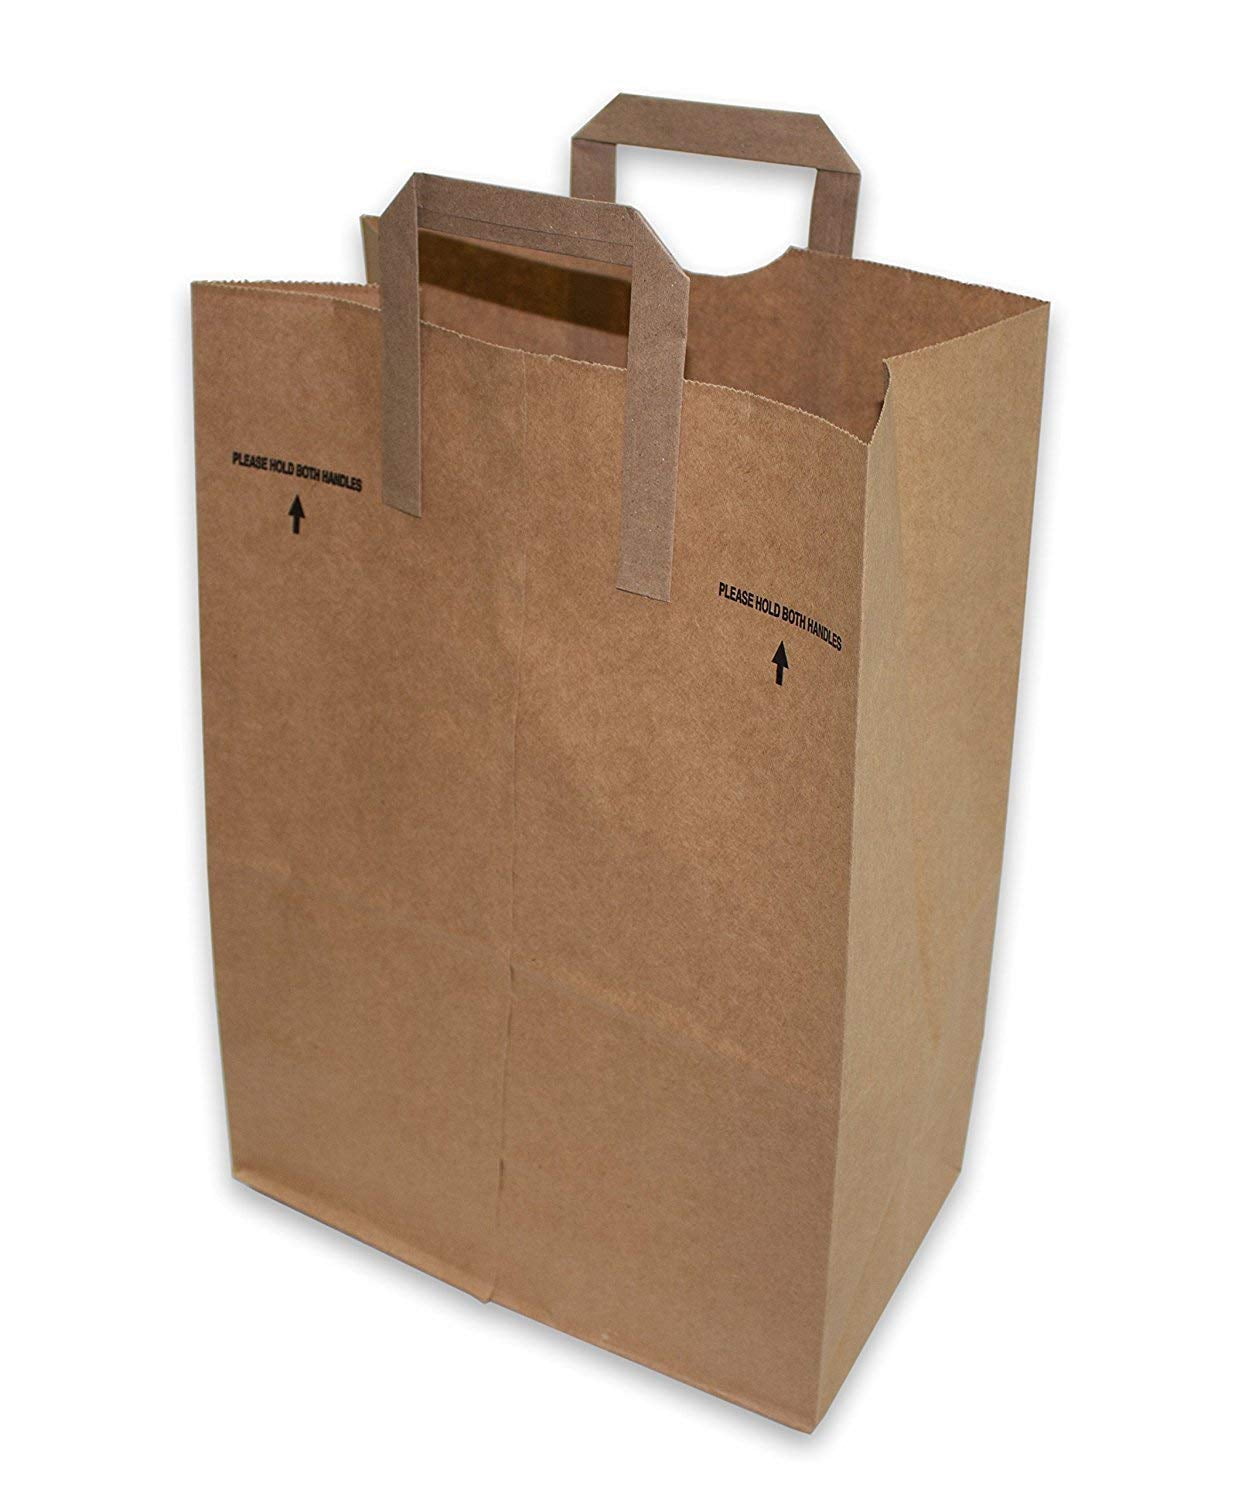 Paper Retail Grocery Bags Kraft with Handles 12x7x17 by Duro (Pack of 100) - www.ermes-unice.fr